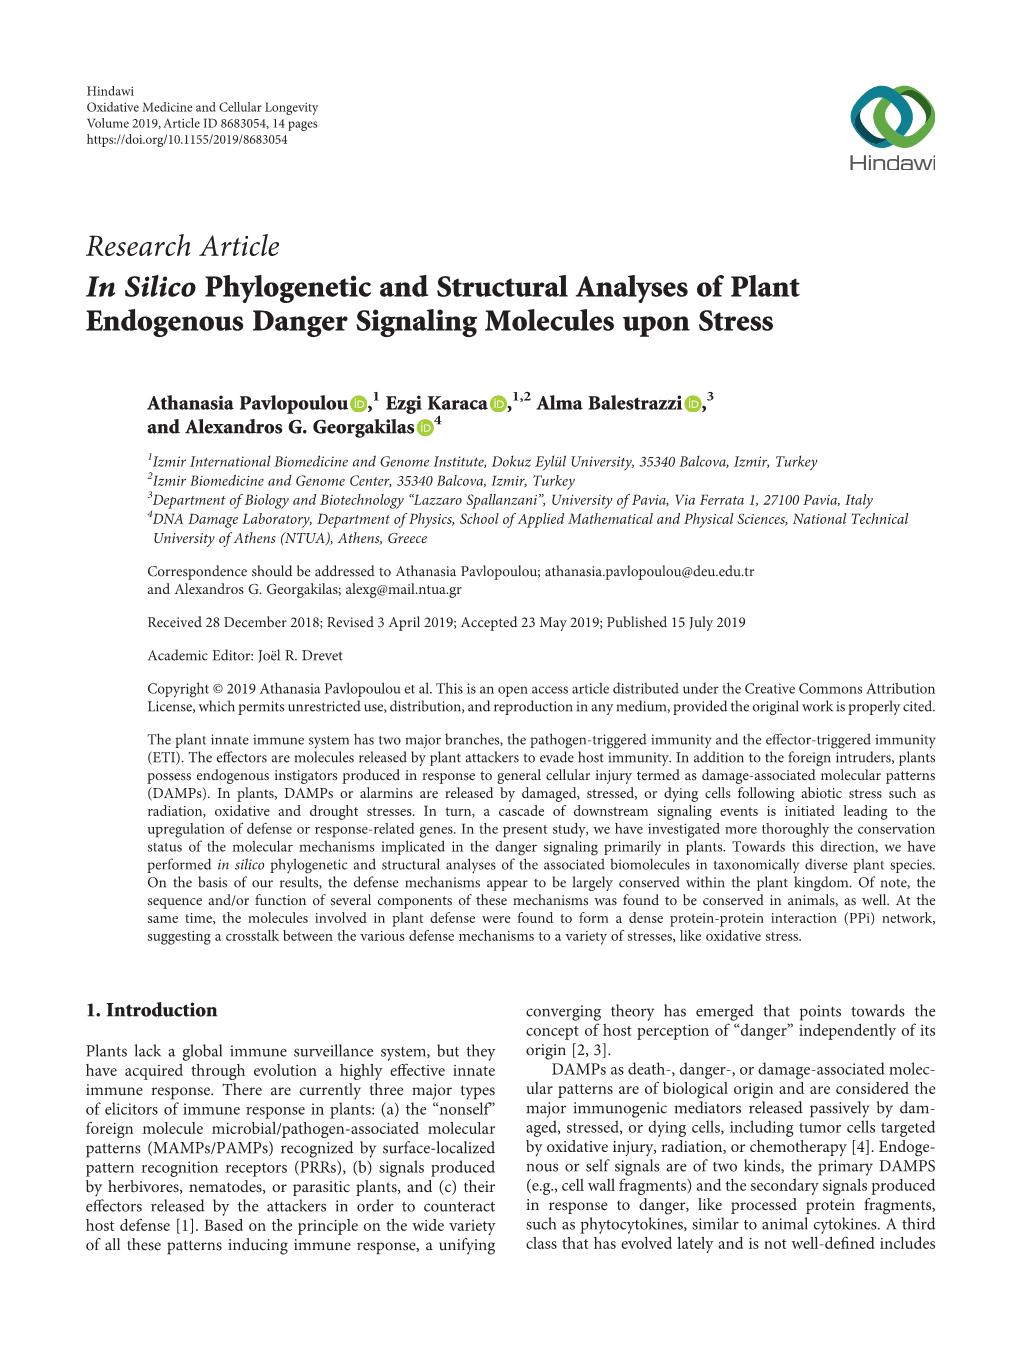 Research Article in Silico Phylogenetic and Structural Analyses of Plant Endogenous Danger Signaling Molecules Upon Stress